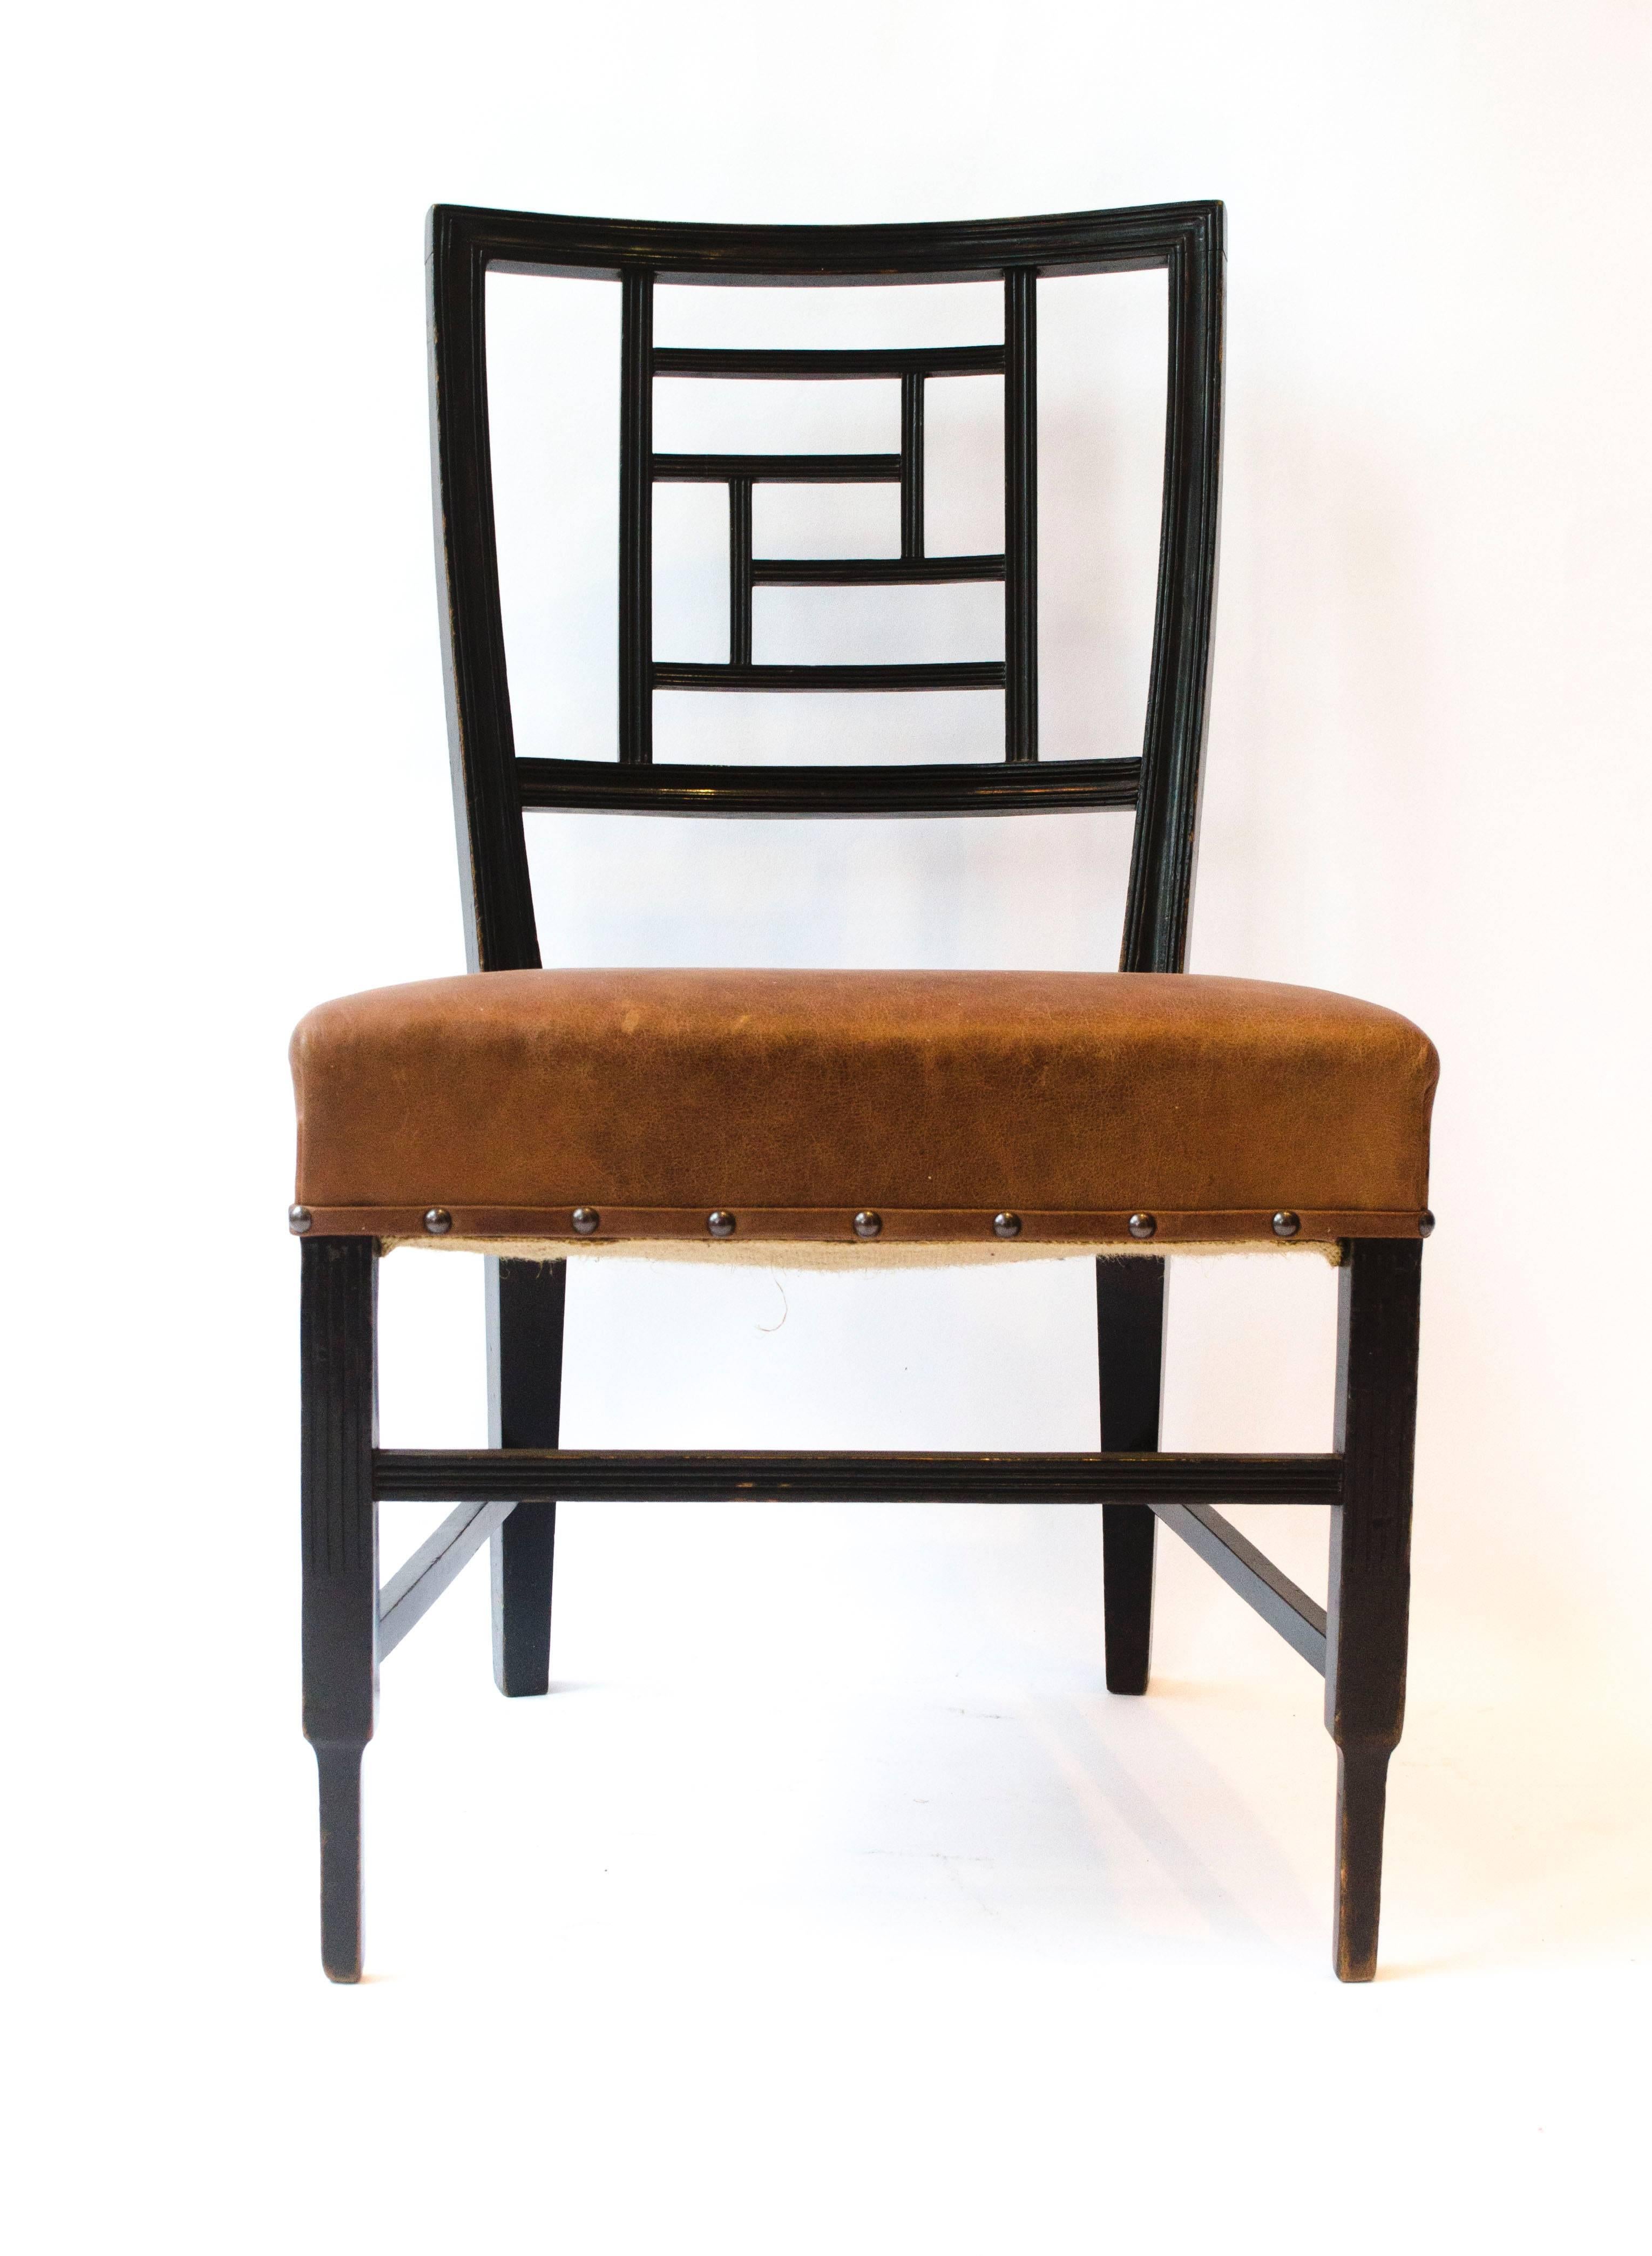 Edward William Godwin, an Anglo-Japanese ebonized side chair, probably made by William Watt. With a lattice back, a later overstuffed leather seat on square part-fluted supports.
See Soros, Susan Weber ‘The Secular Furniture of E.W. Godwin’, p. 113,